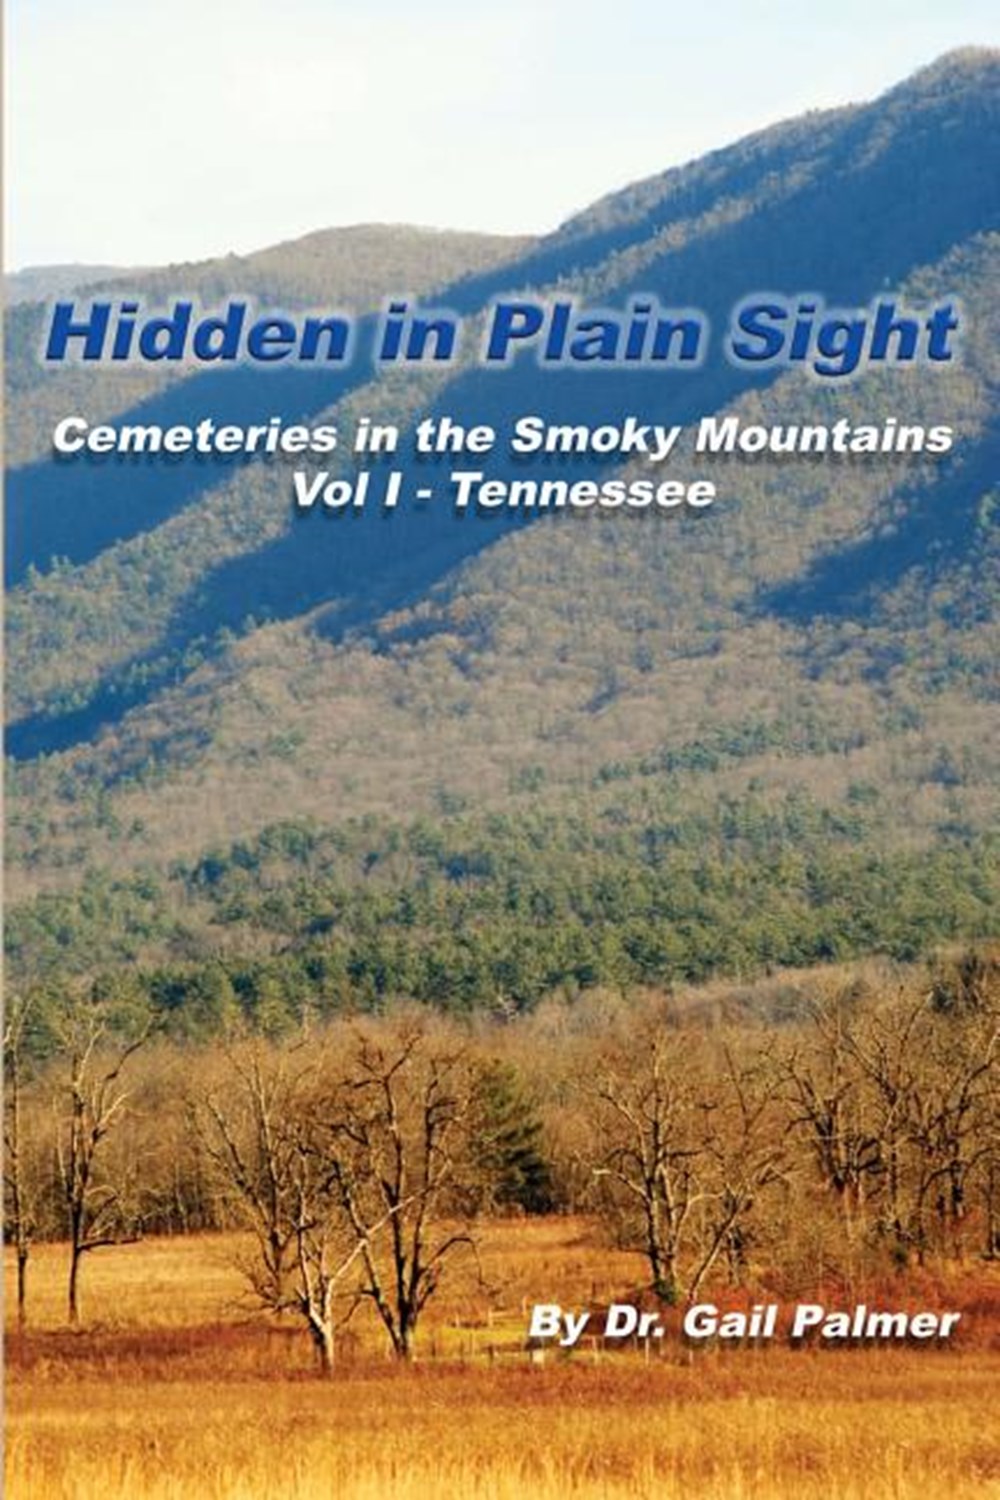 Hidden in Plain Sight: Cemeteries of the Smoky Mountains, Vol.1-Tennessee